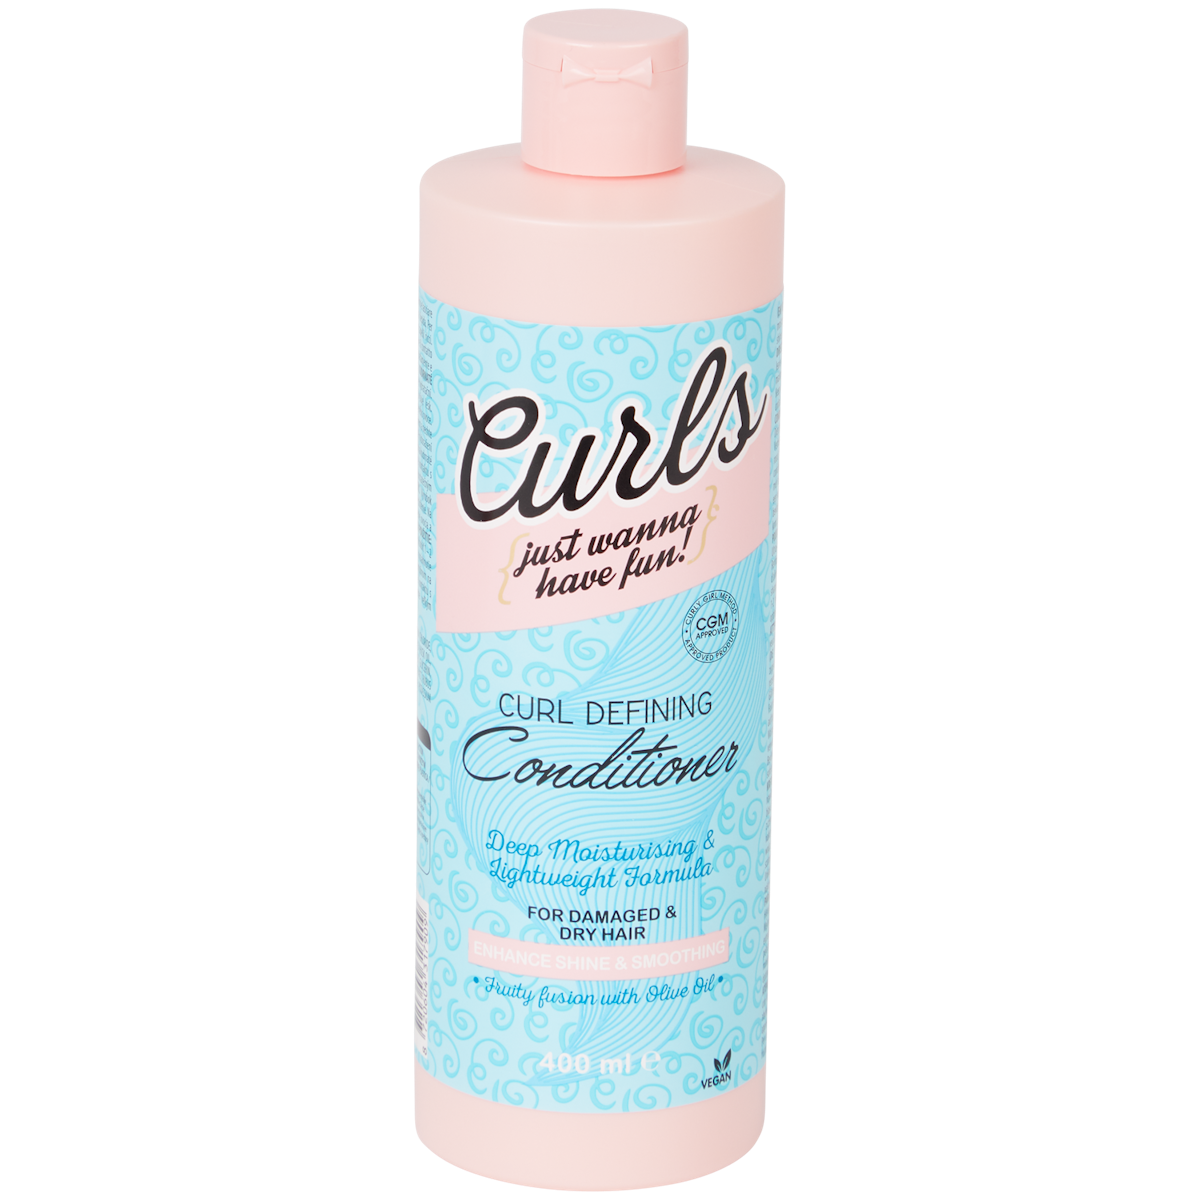 Curls Just Wanna Have Fun conditioner